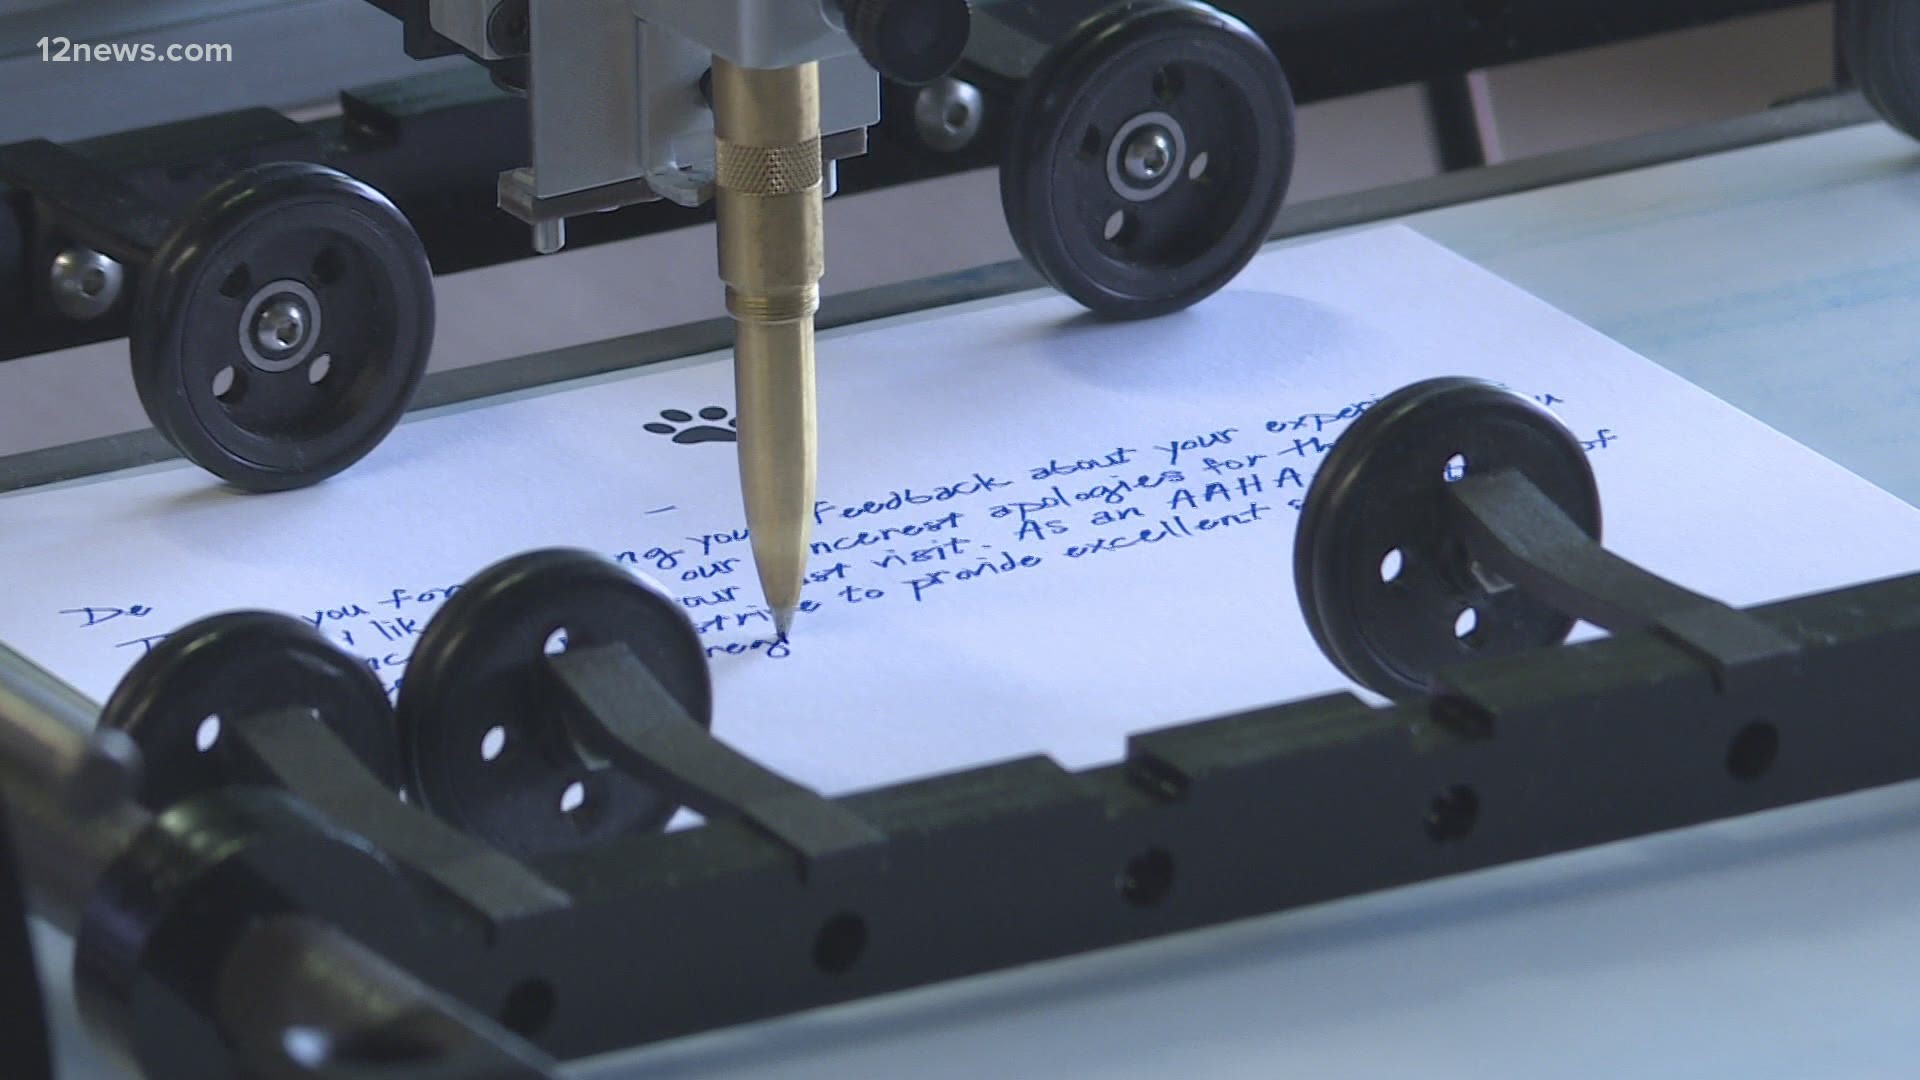 We're living in a digital world where creative handwriting is becoming a lost art. A Phoenix company, Handwrytten, is keeping the art form alive with technology.